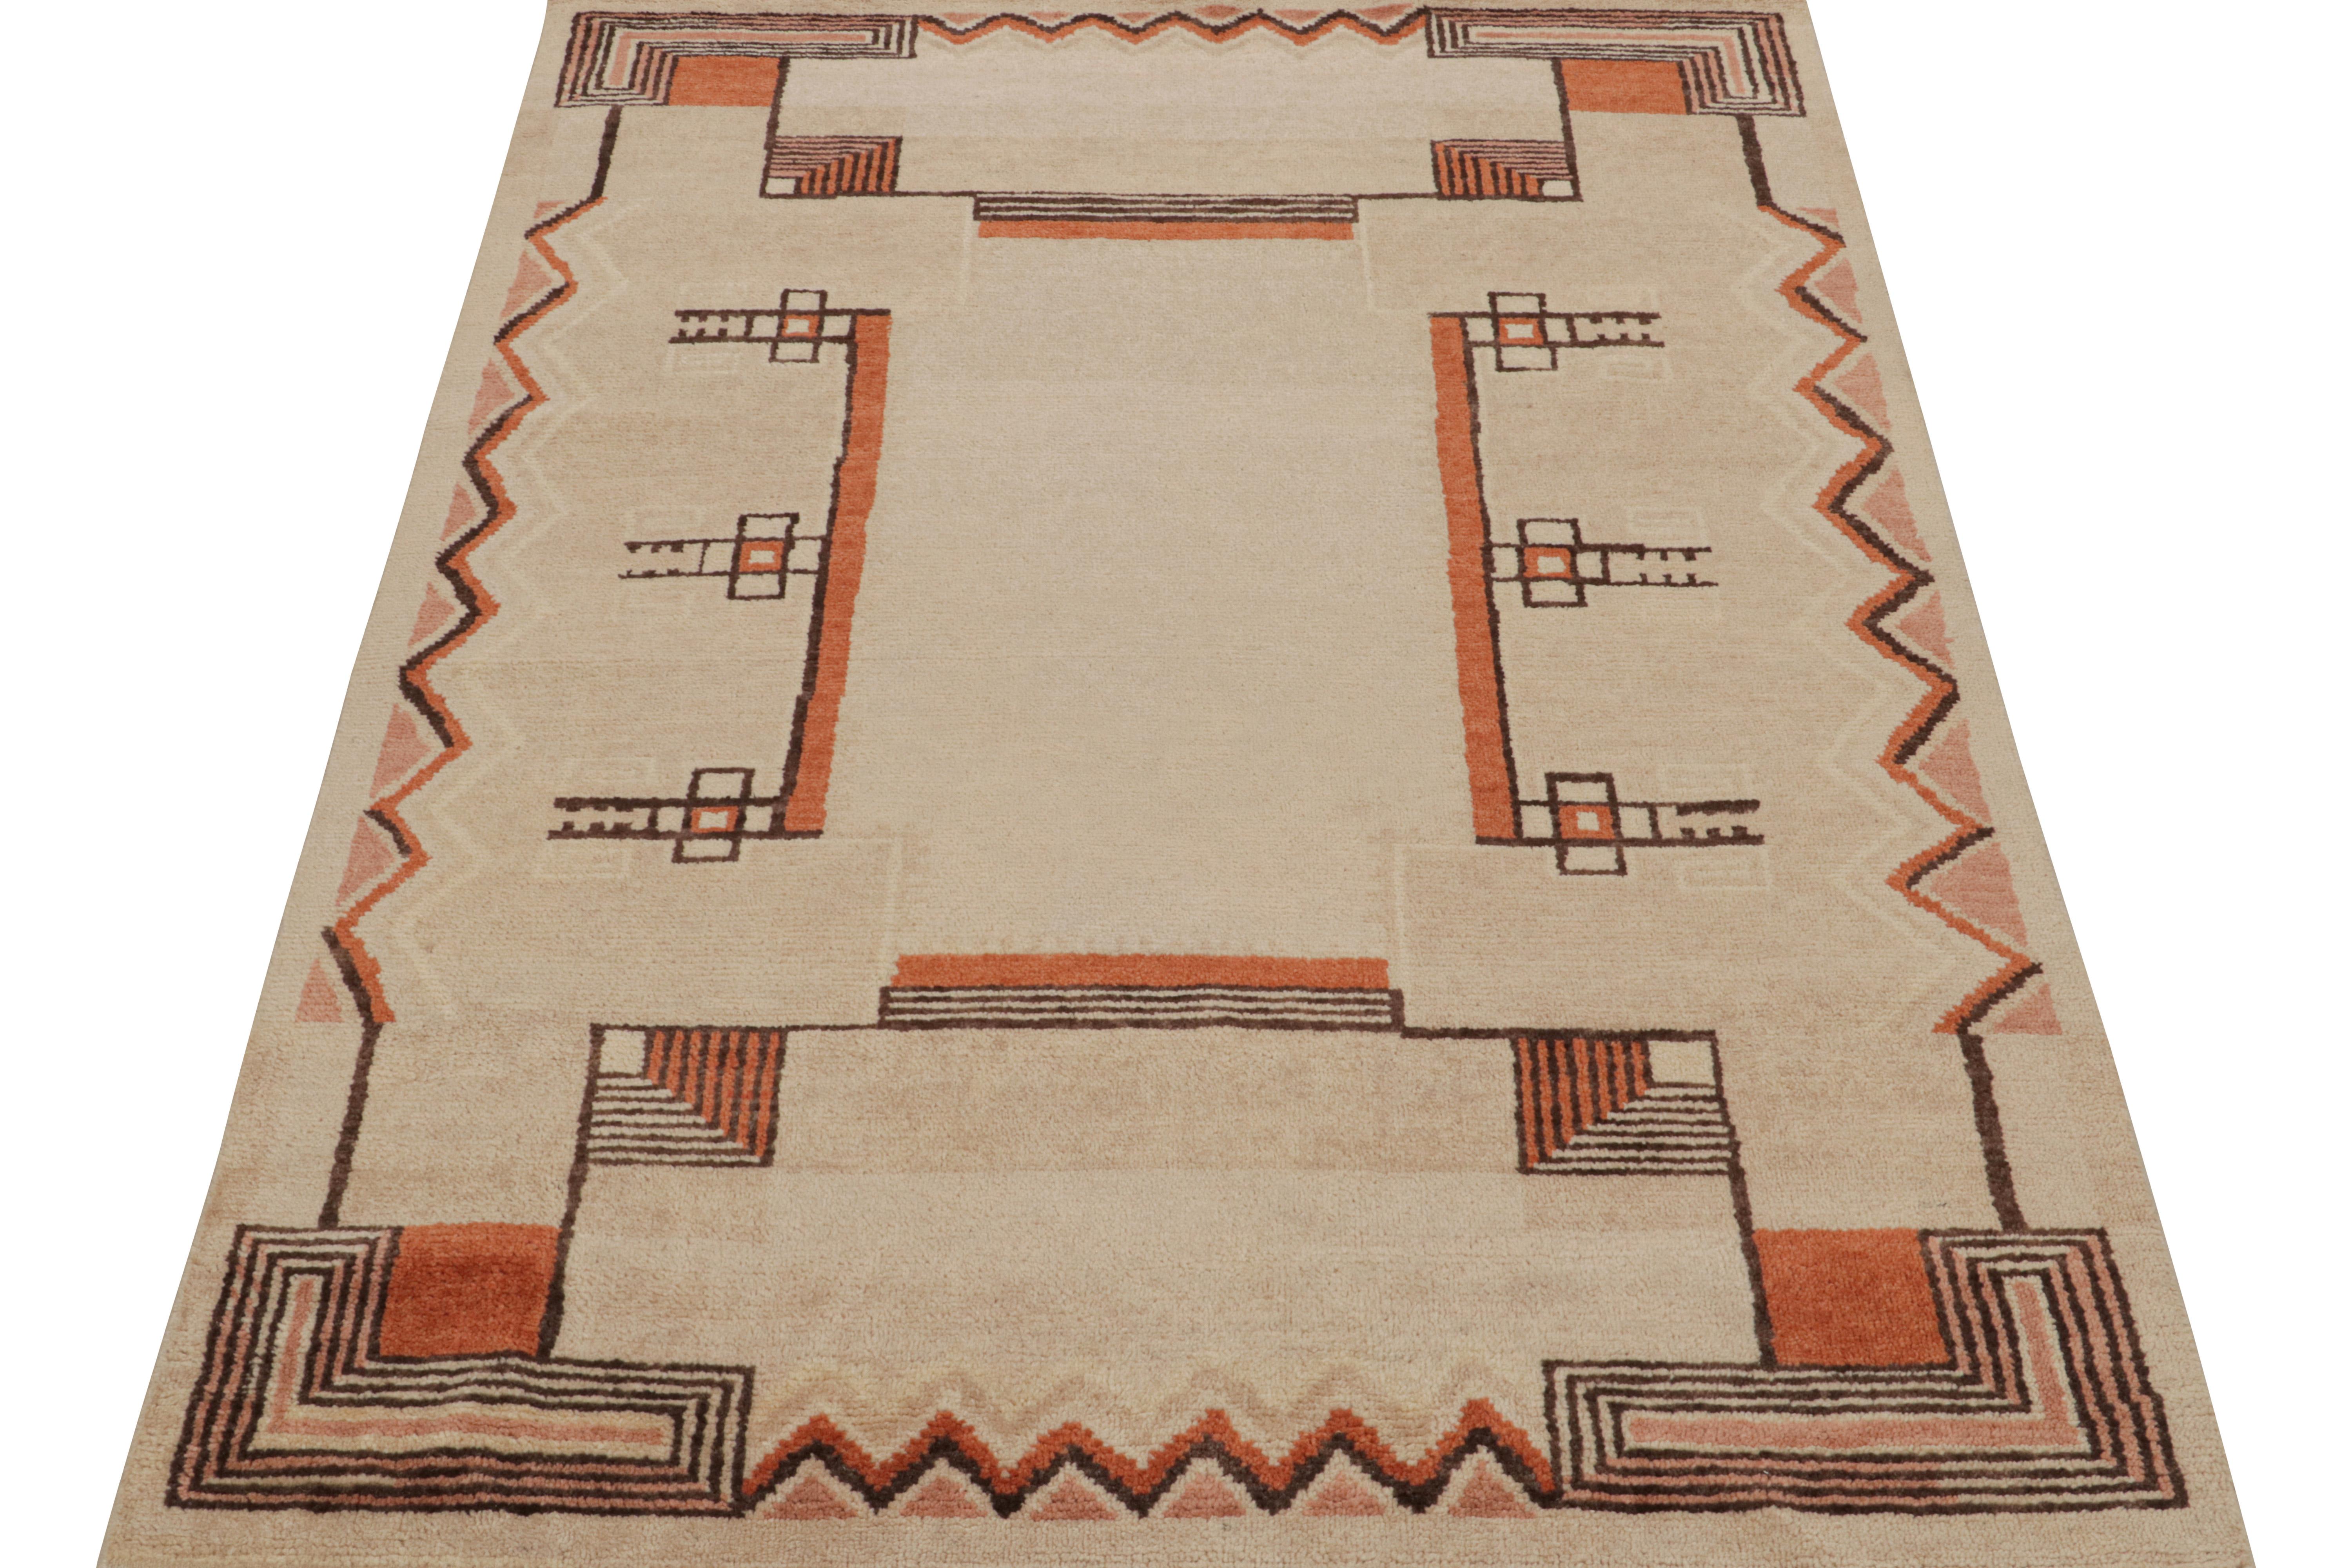 Indian Rug & Kilim’s French Art Deco Style Rug in Beige and Orange Geometric Patterns For Sale